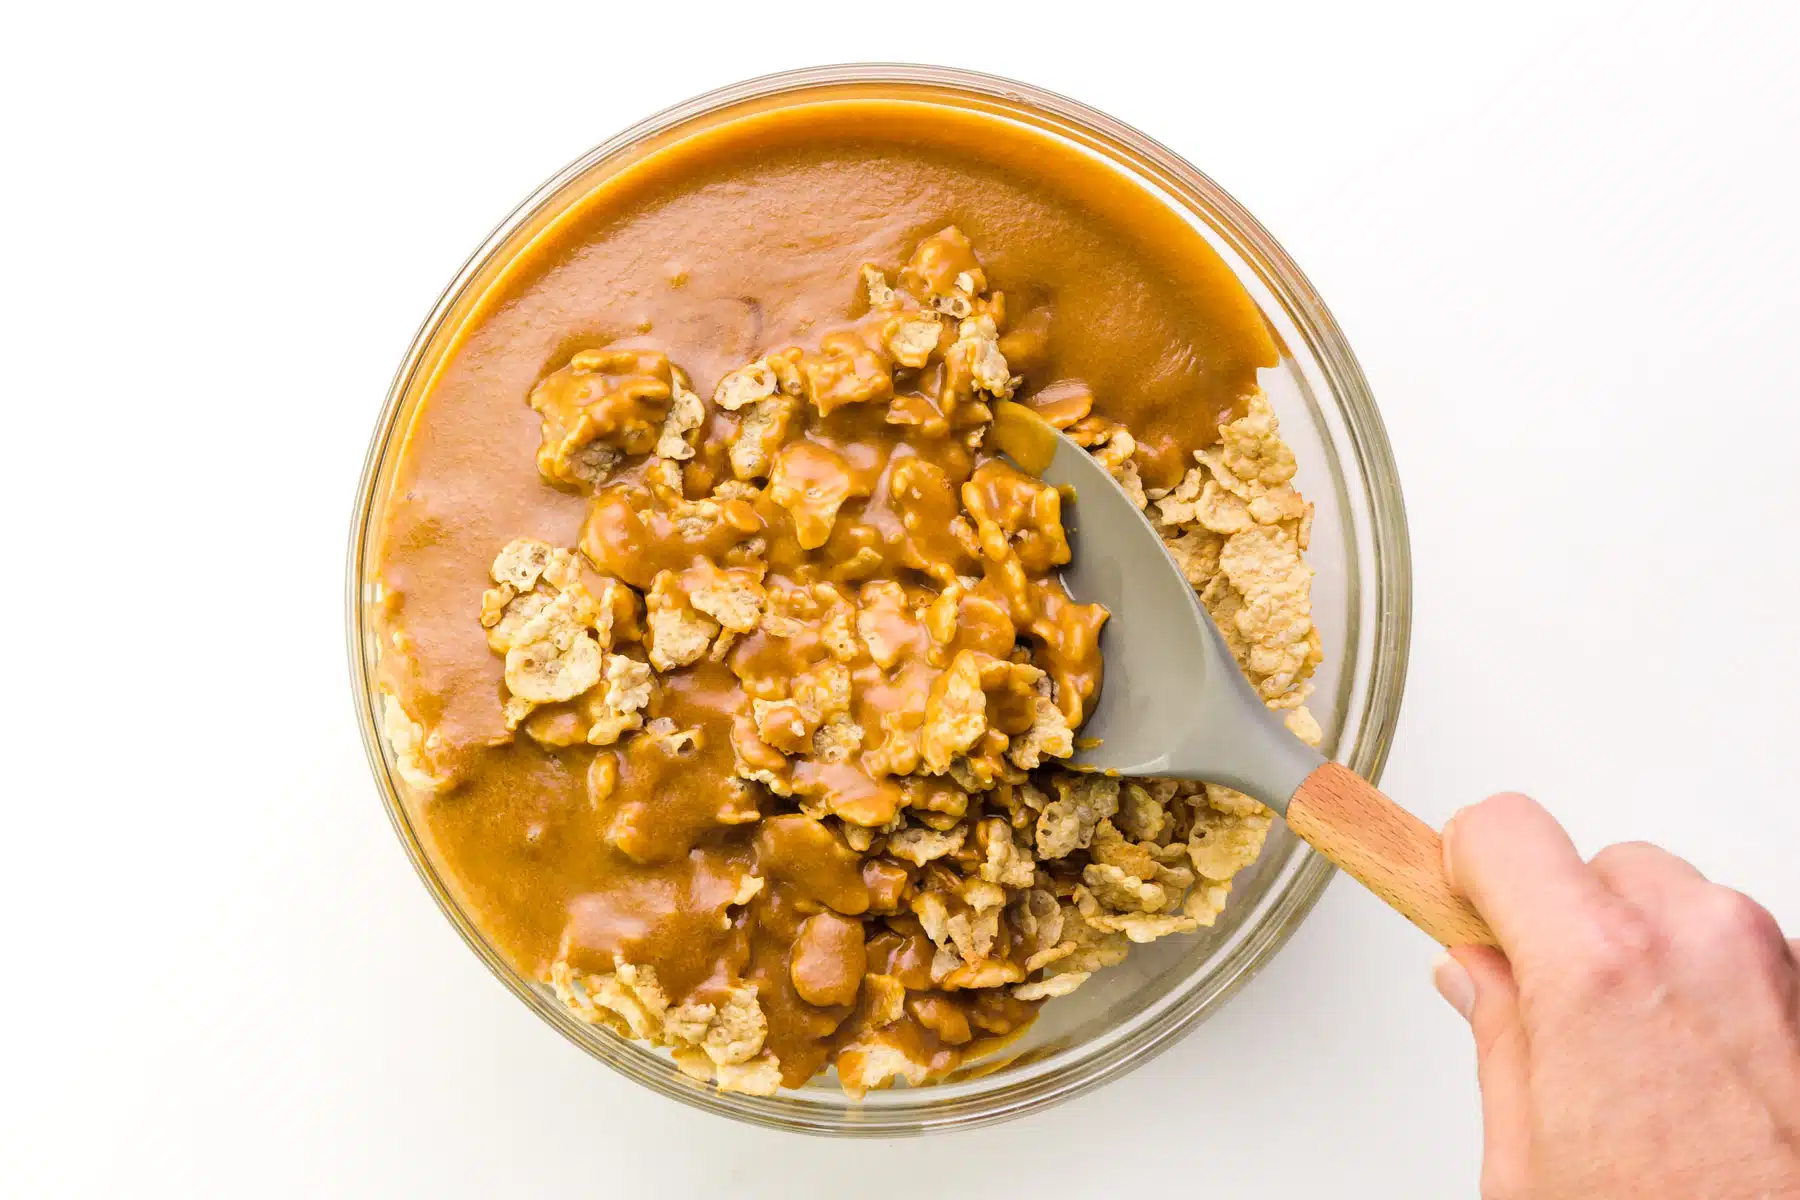 A hand holds a spatula stirring peanut butter and cereal together.